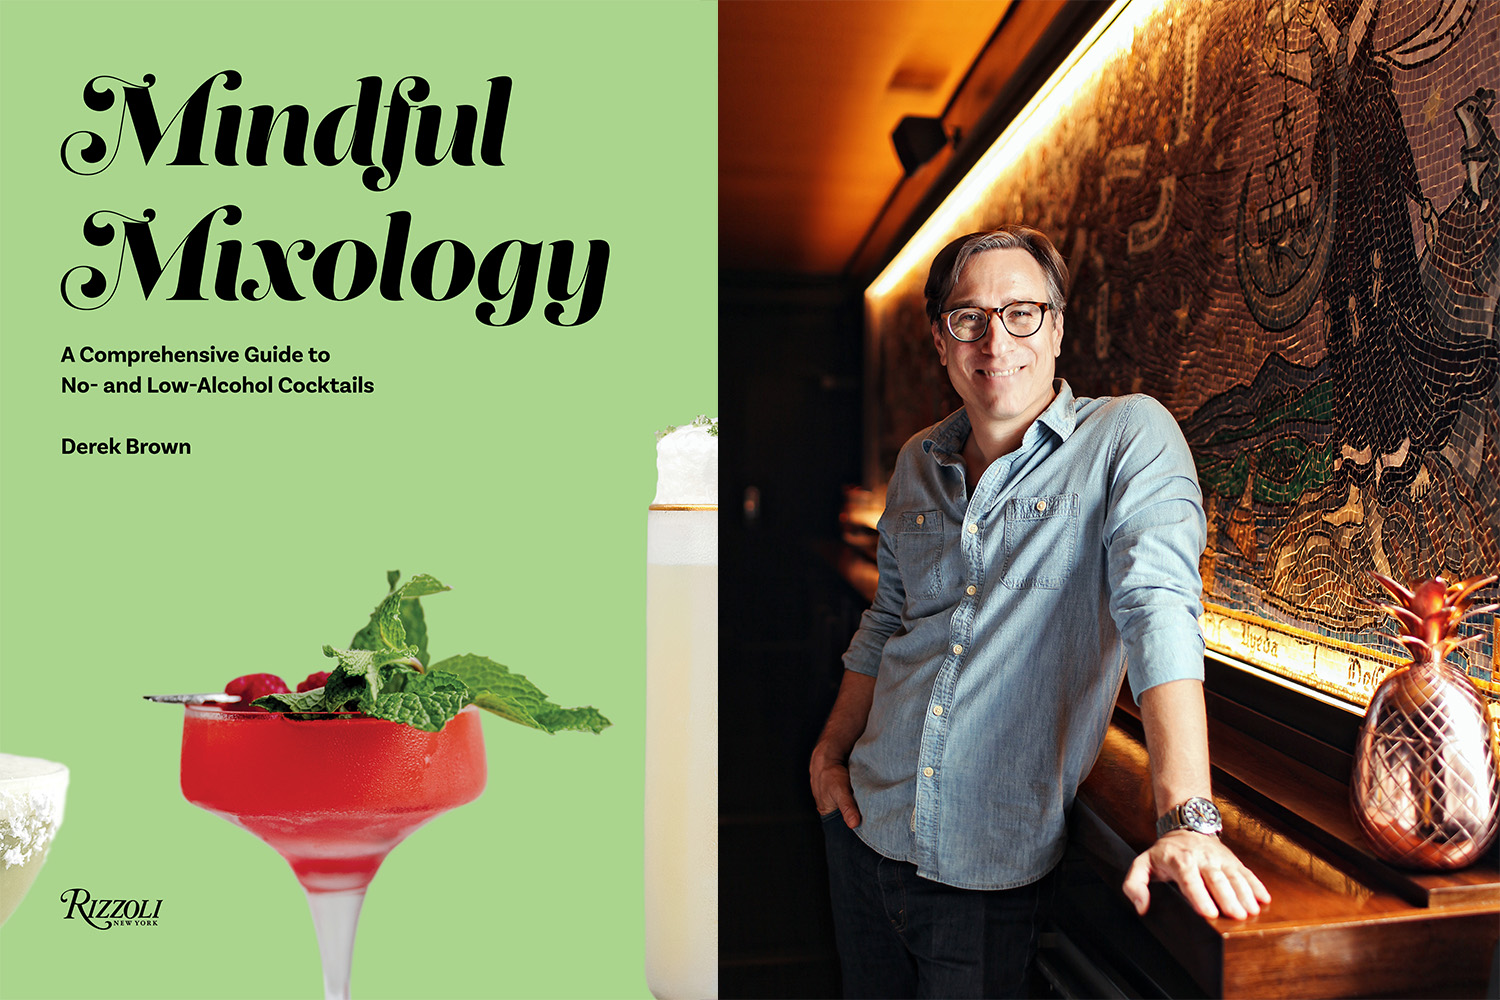 Derek Brown and his upcoming book, Mindful Mixology